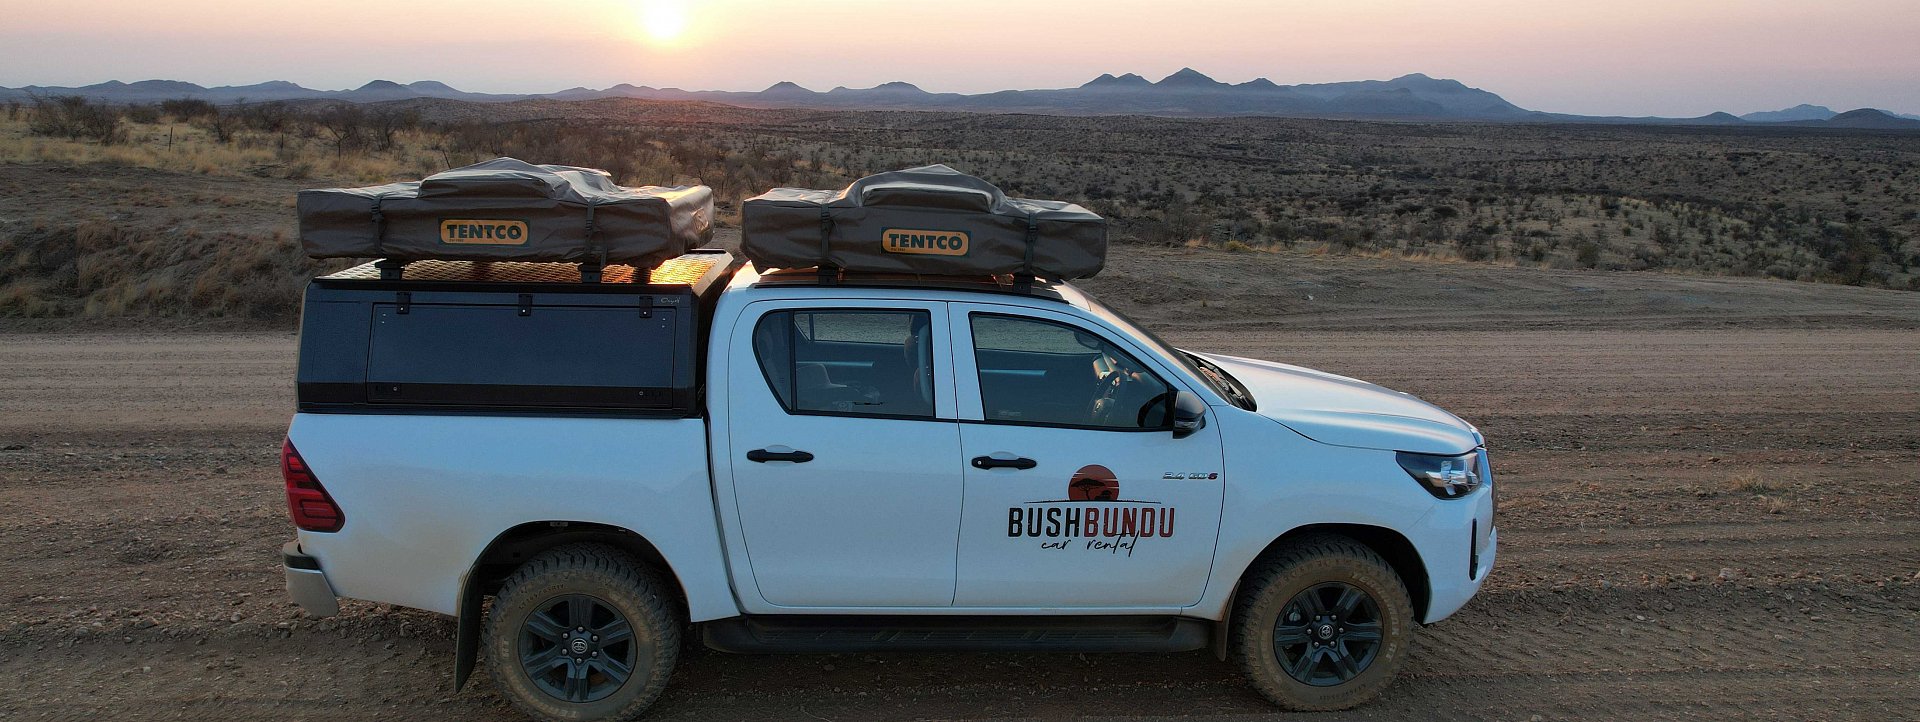 bushbundu-car-rental-windhoek-namibia-home-page-image-of-fully-equipped-with-camping-equipment-4x4-toyota-hilux-on-the-dessert-side-view